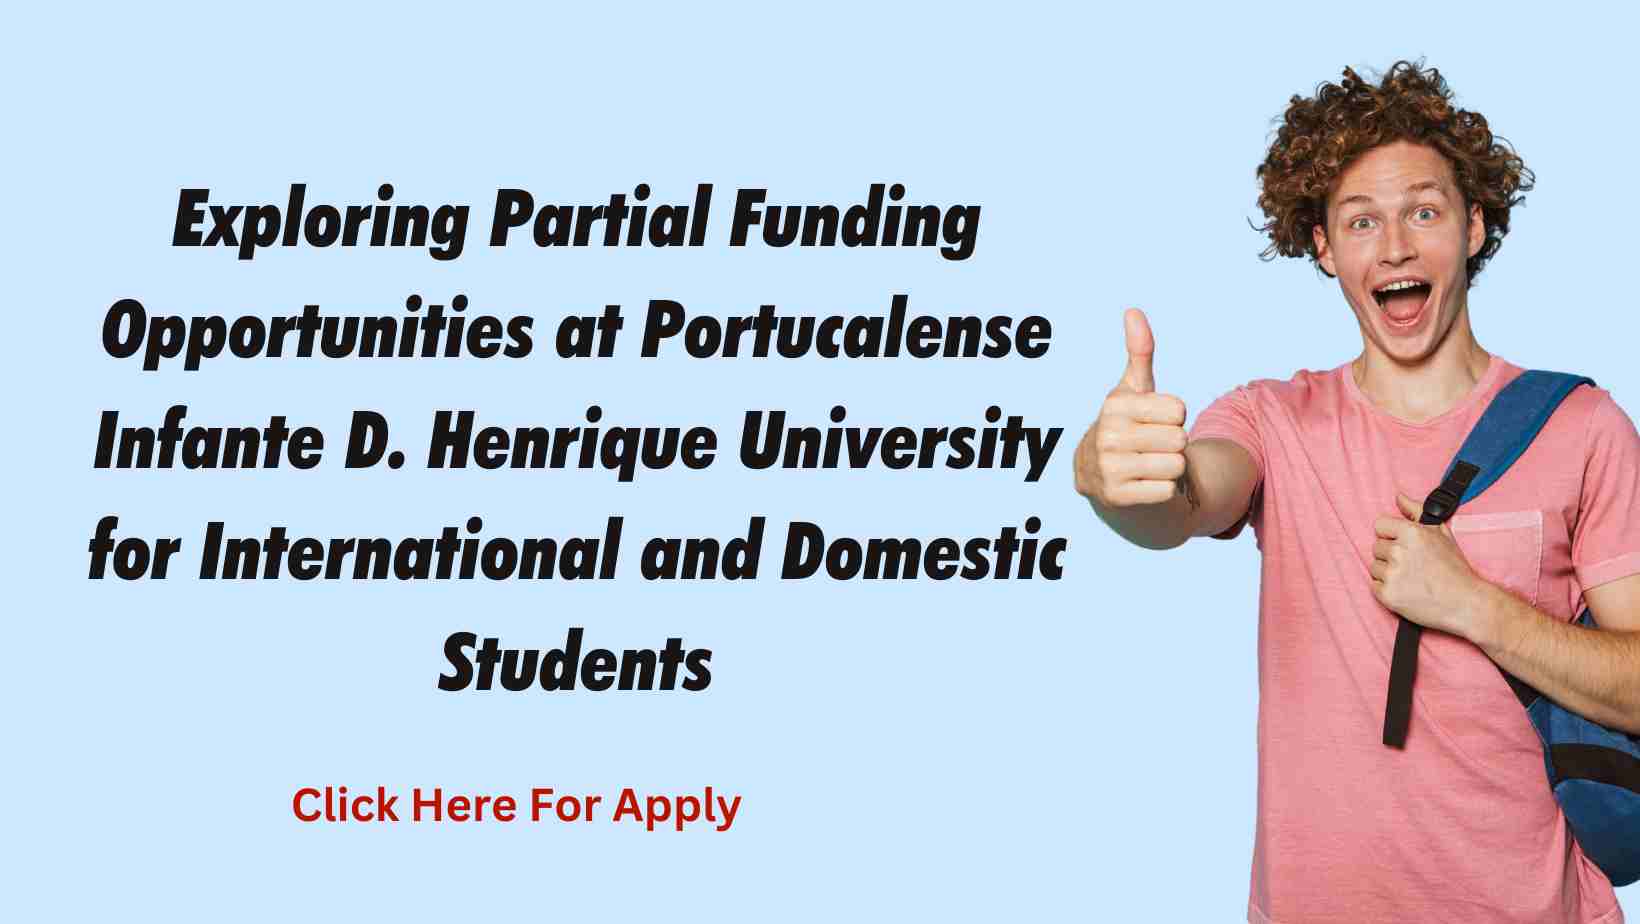 Exploring Partial Funding Opportunities at Portucalense Infante D. Henrique University for International and Domestic Students